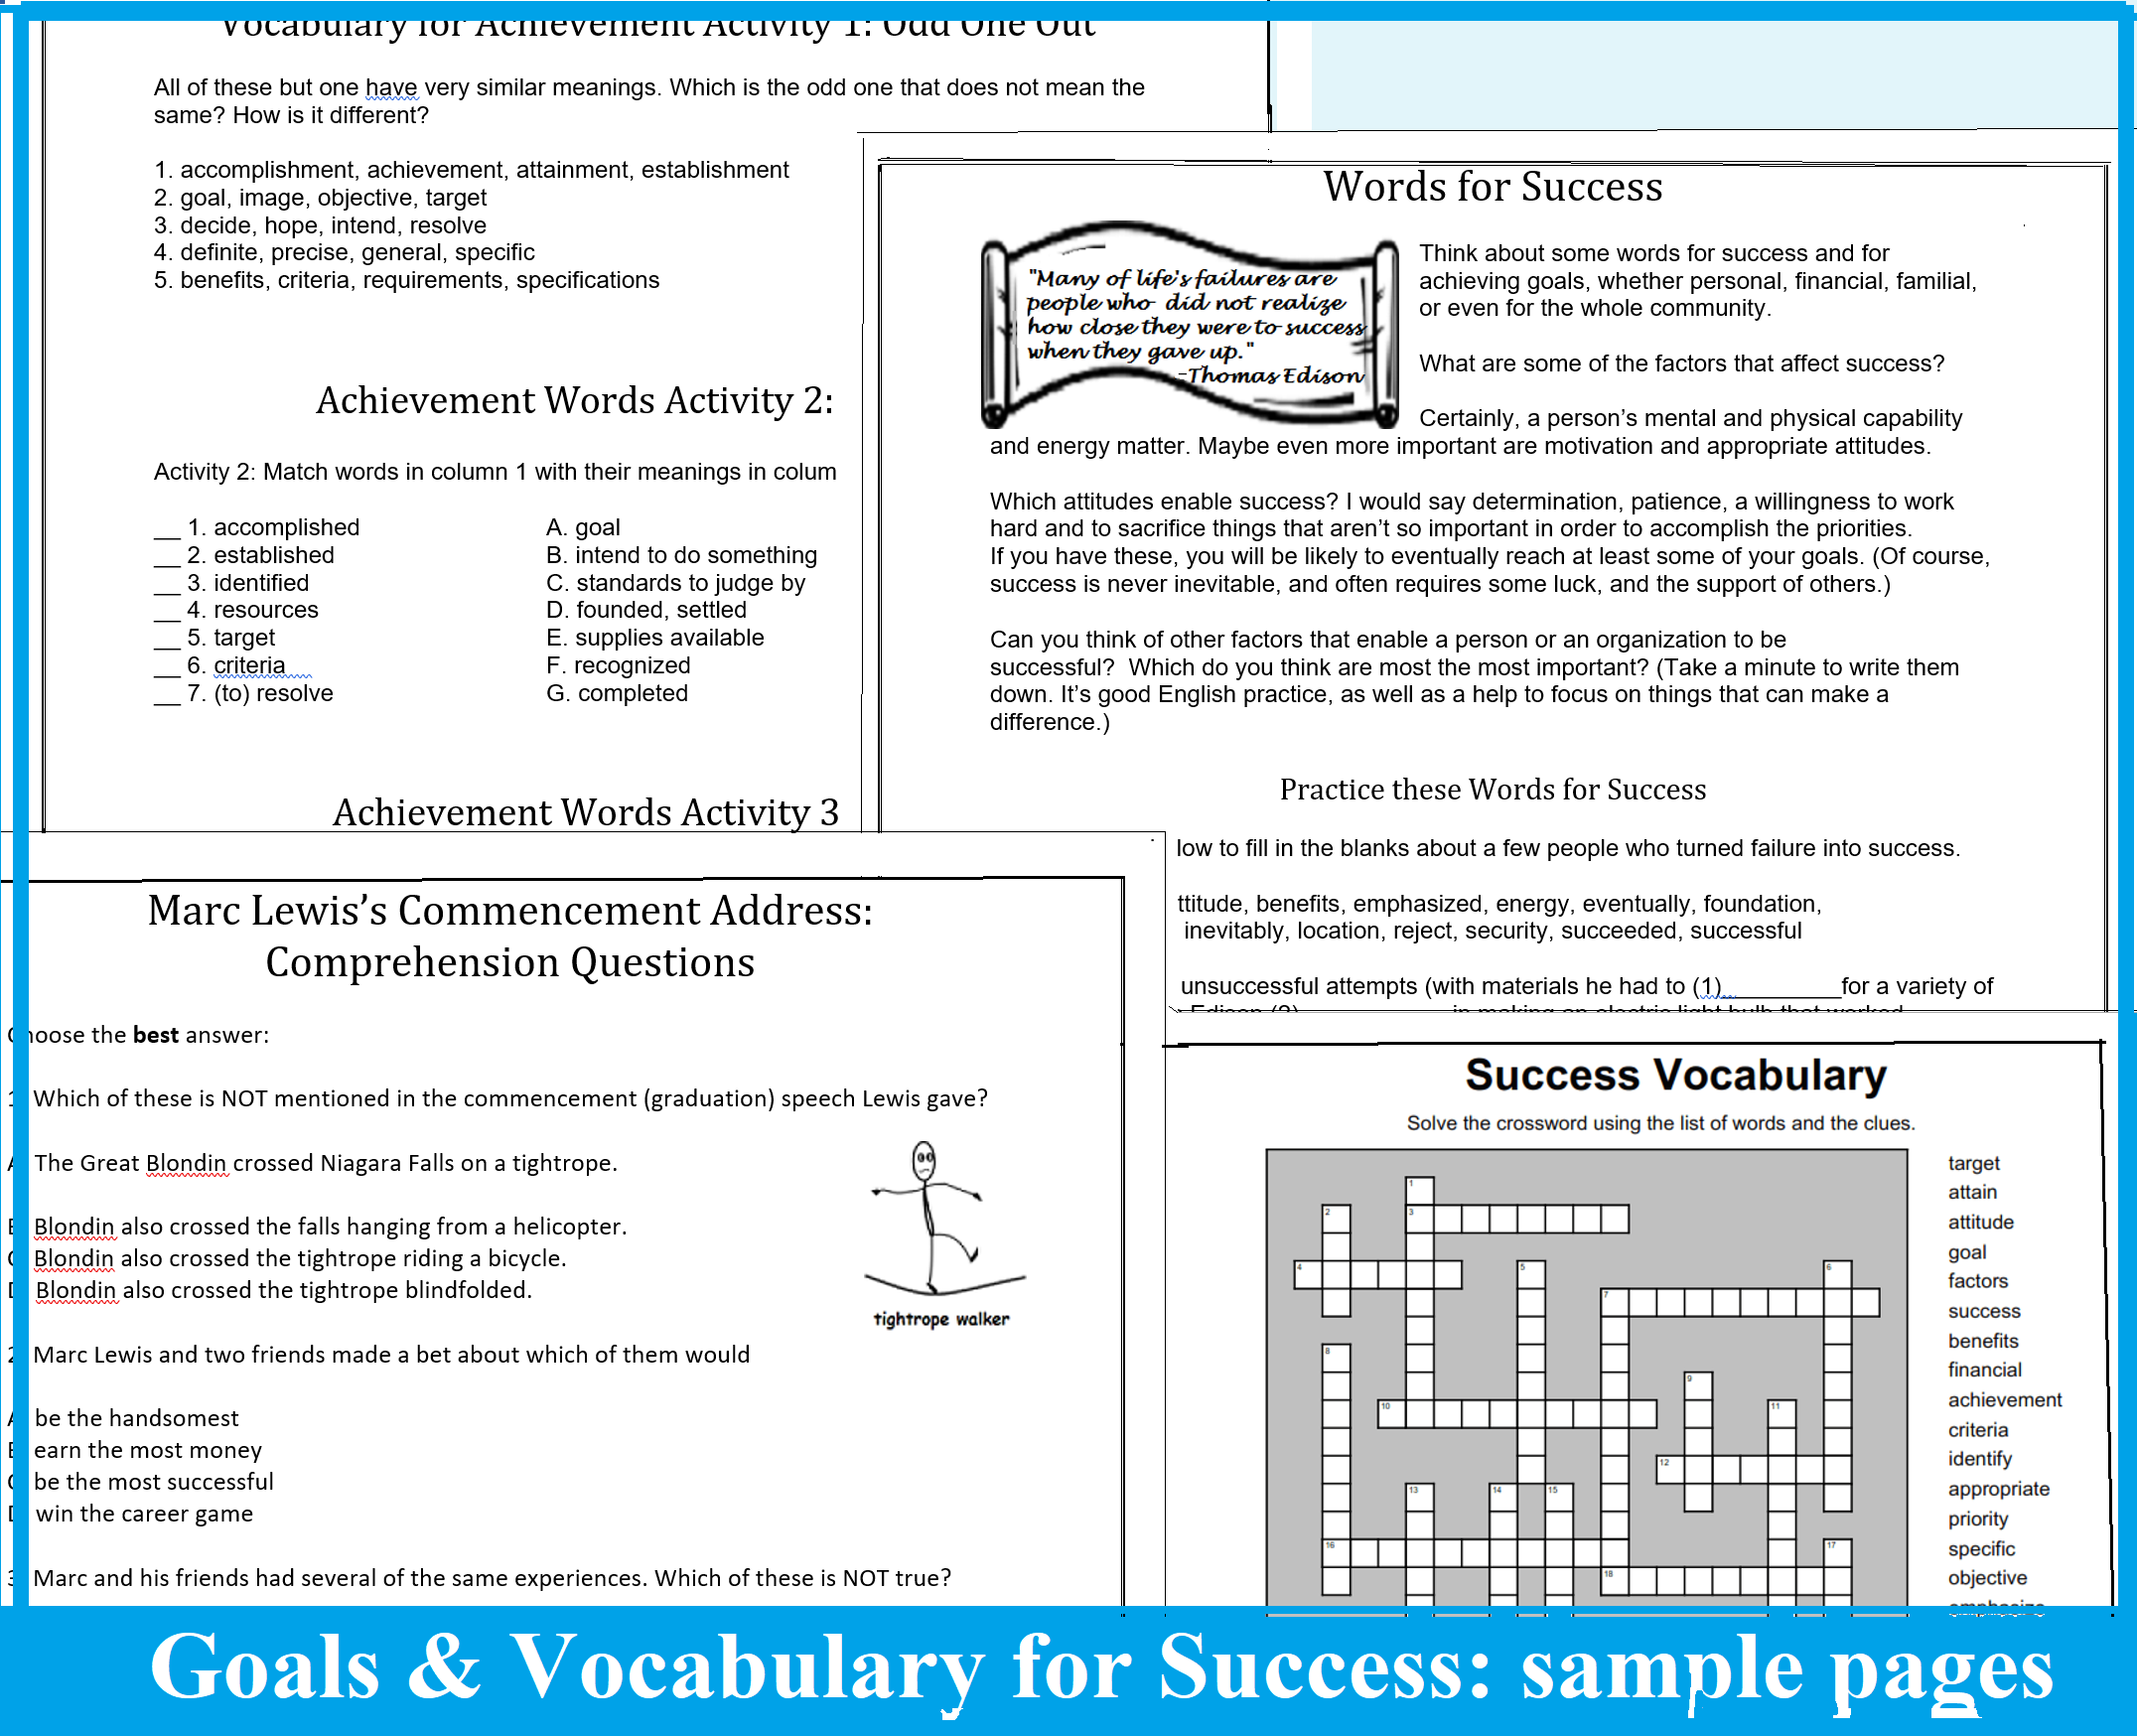 some sample pages from Goals & Vocabulary for Success